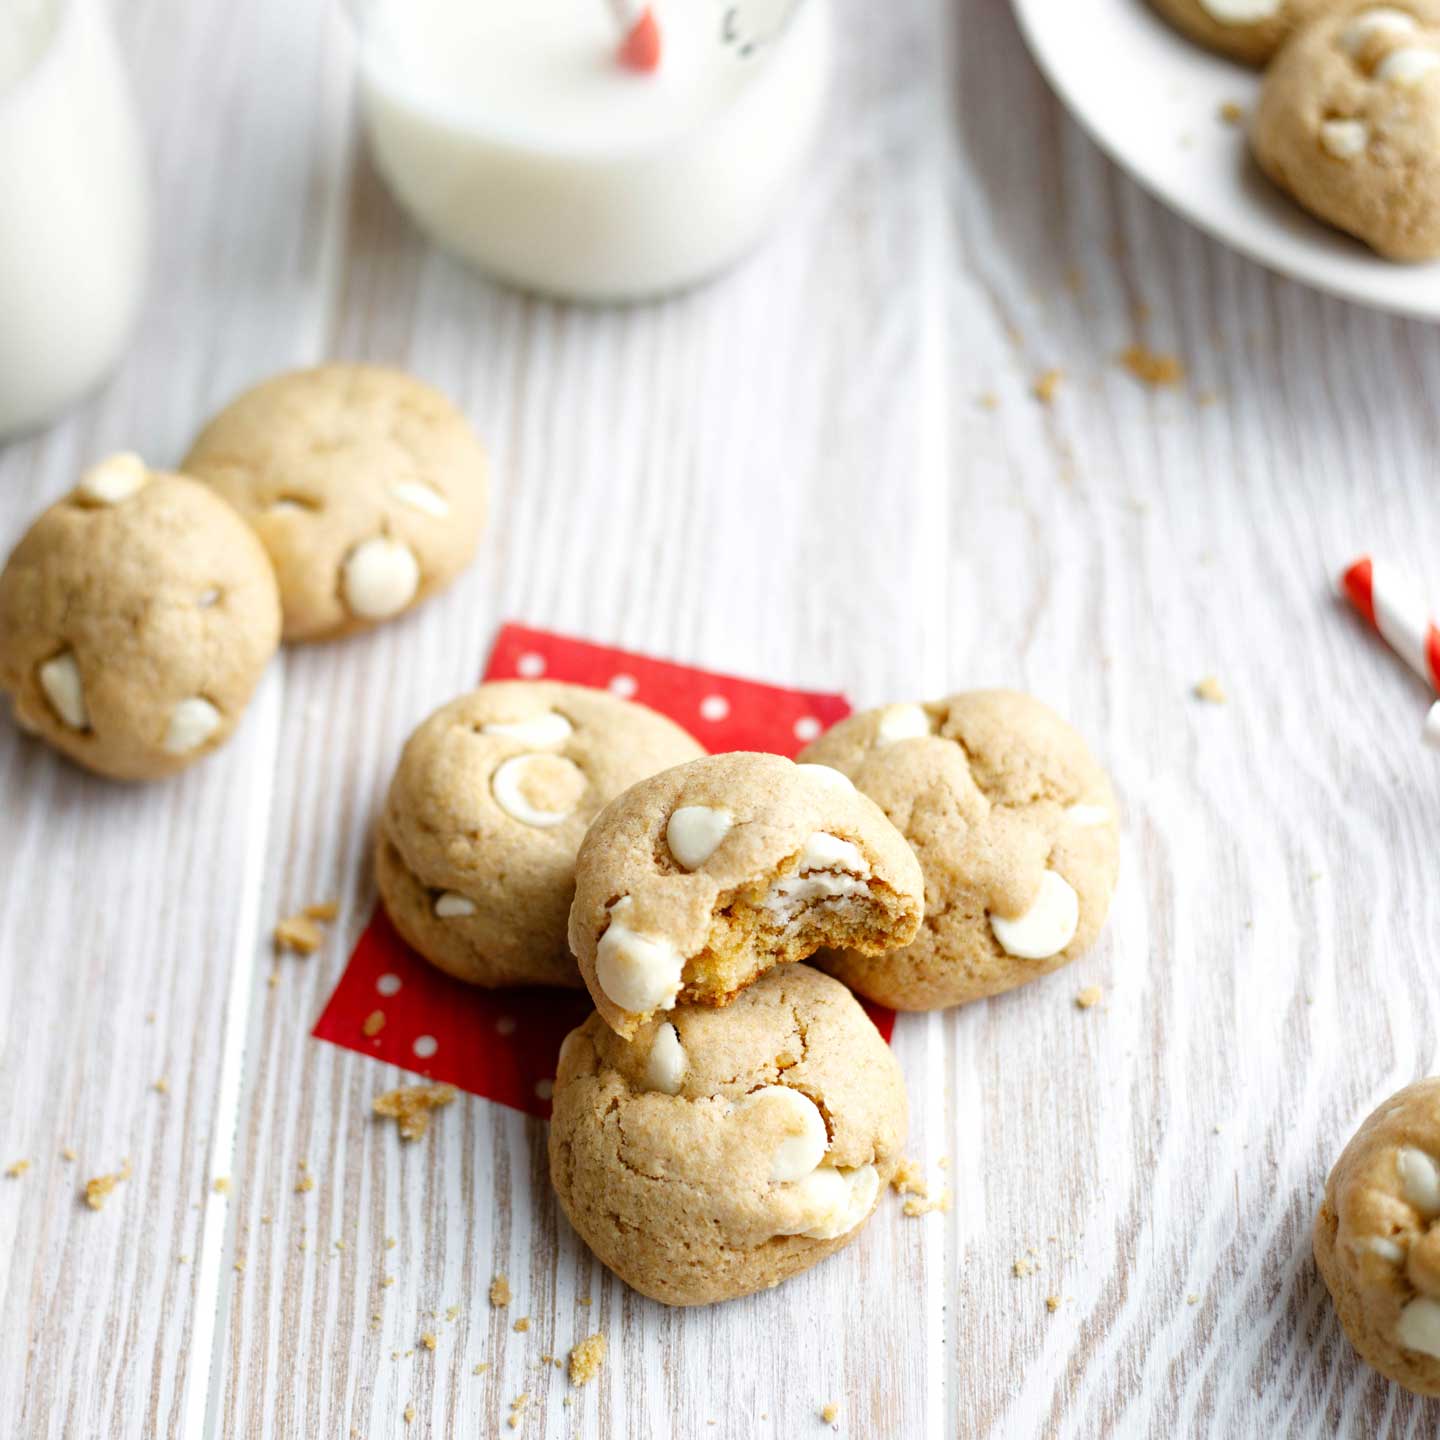 Peppermint-White Chocolate Chickpea Cookie Recipe